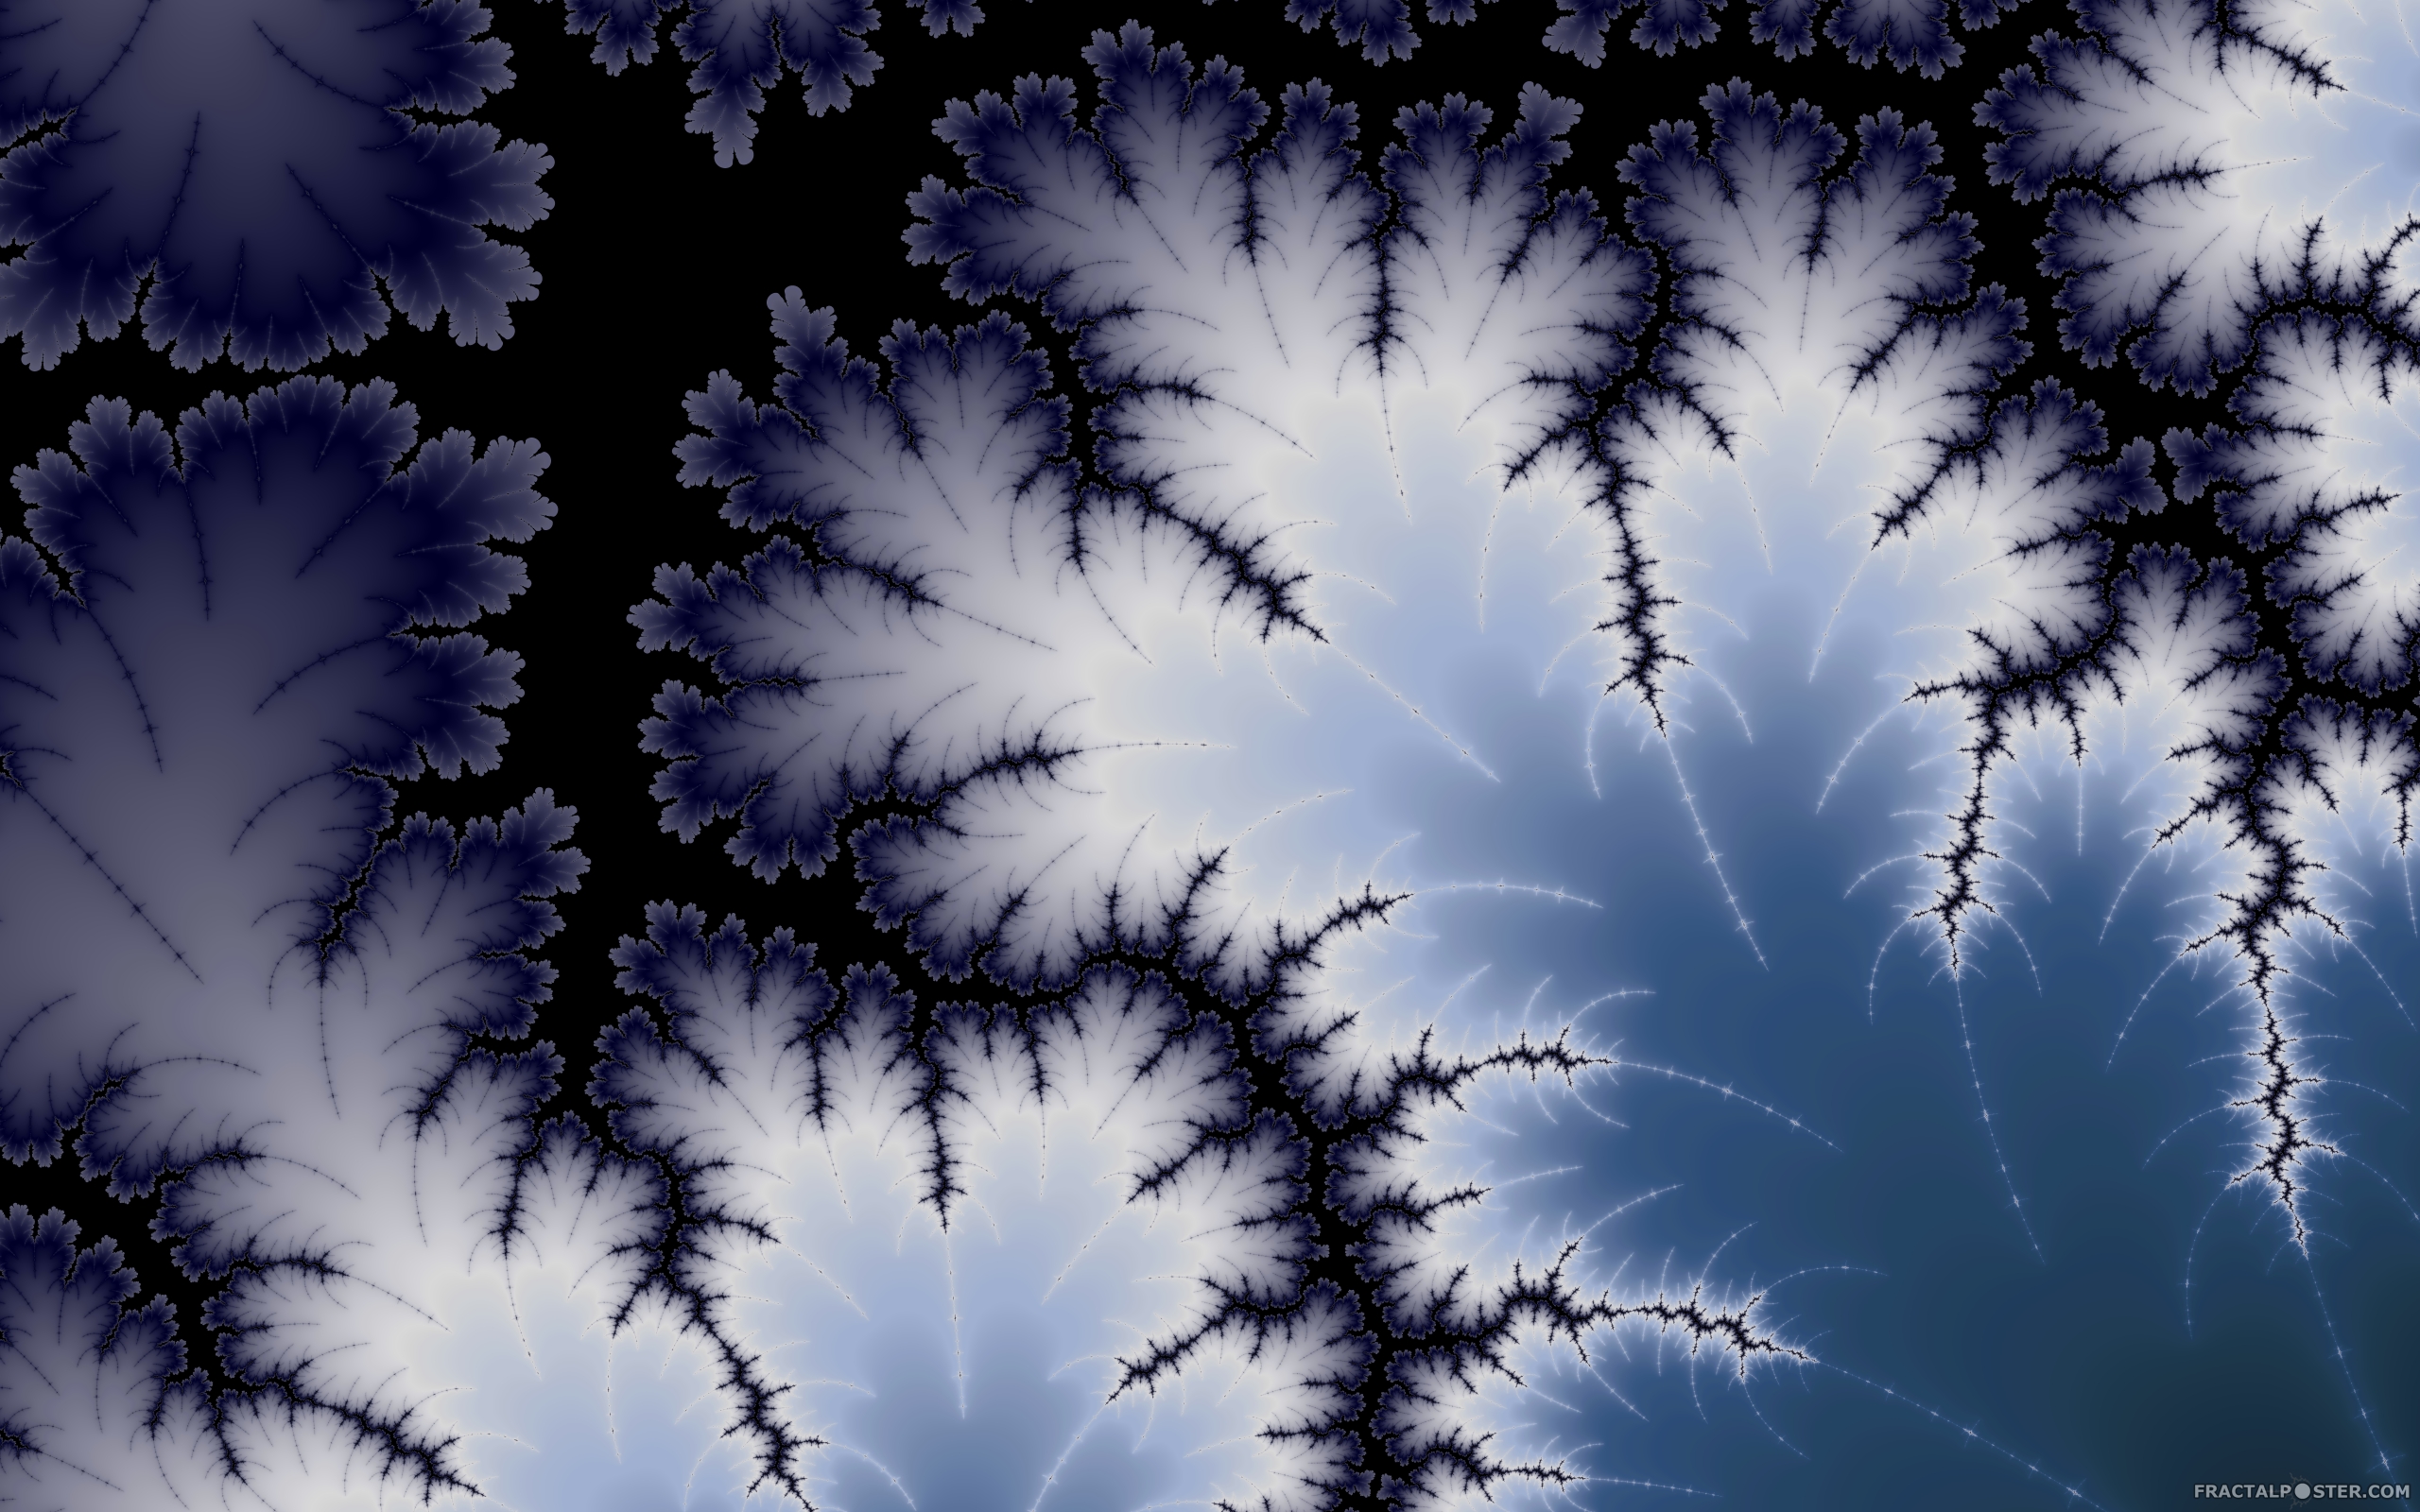 Winter leaf fractal image by fractalposter. HD Wallpaper, posters, comments and rates